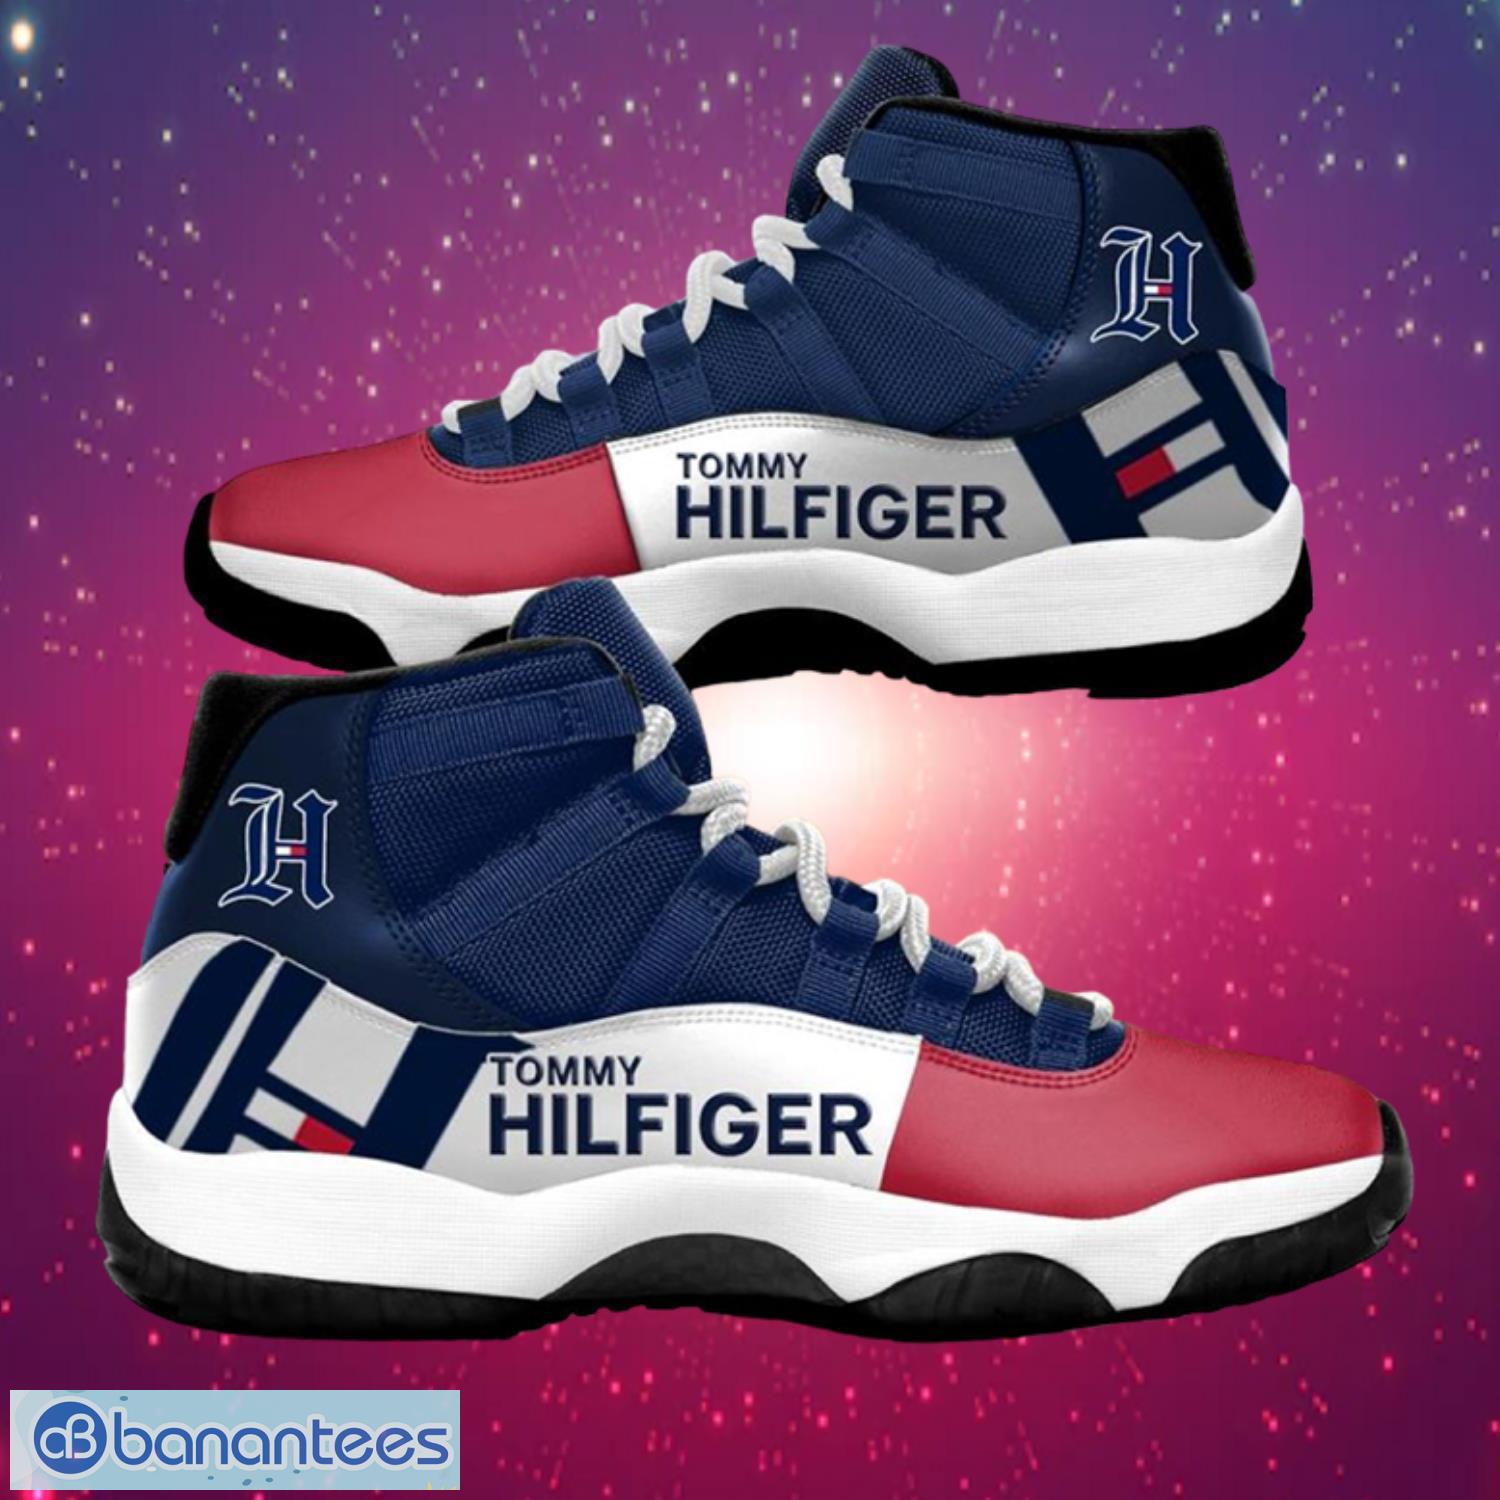 Tommy Hilfiger White Red Luxury Air Jordan 11 Shoes Product Photo 1